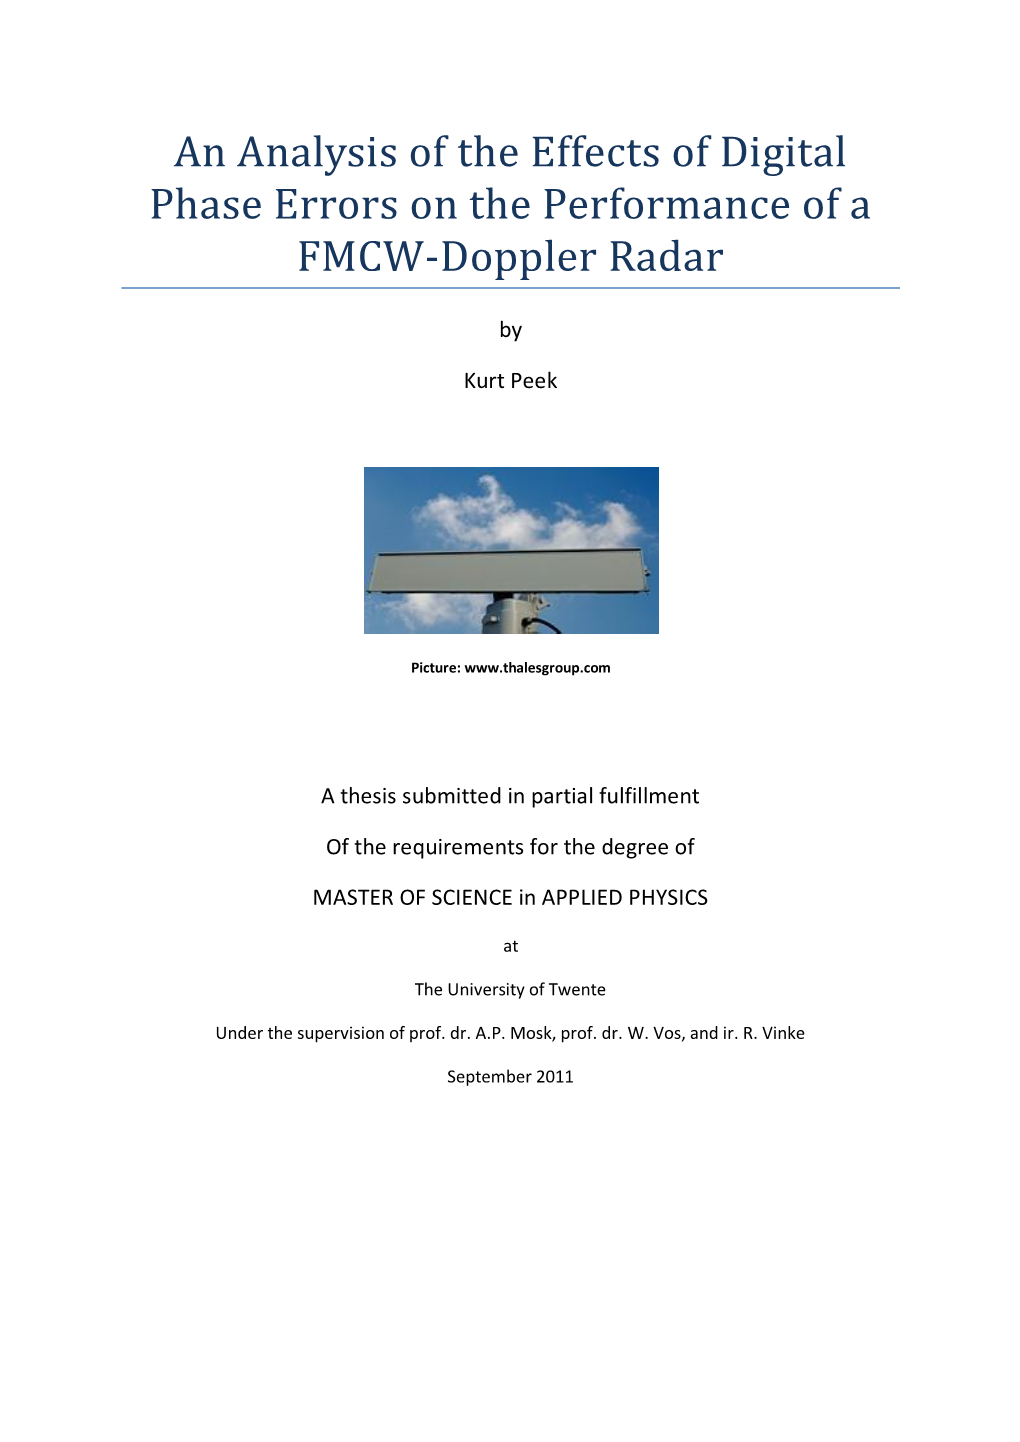 An Analysis of the Effects of Digital Phase Errors on the Performance of a FMCW-Doppler Radar